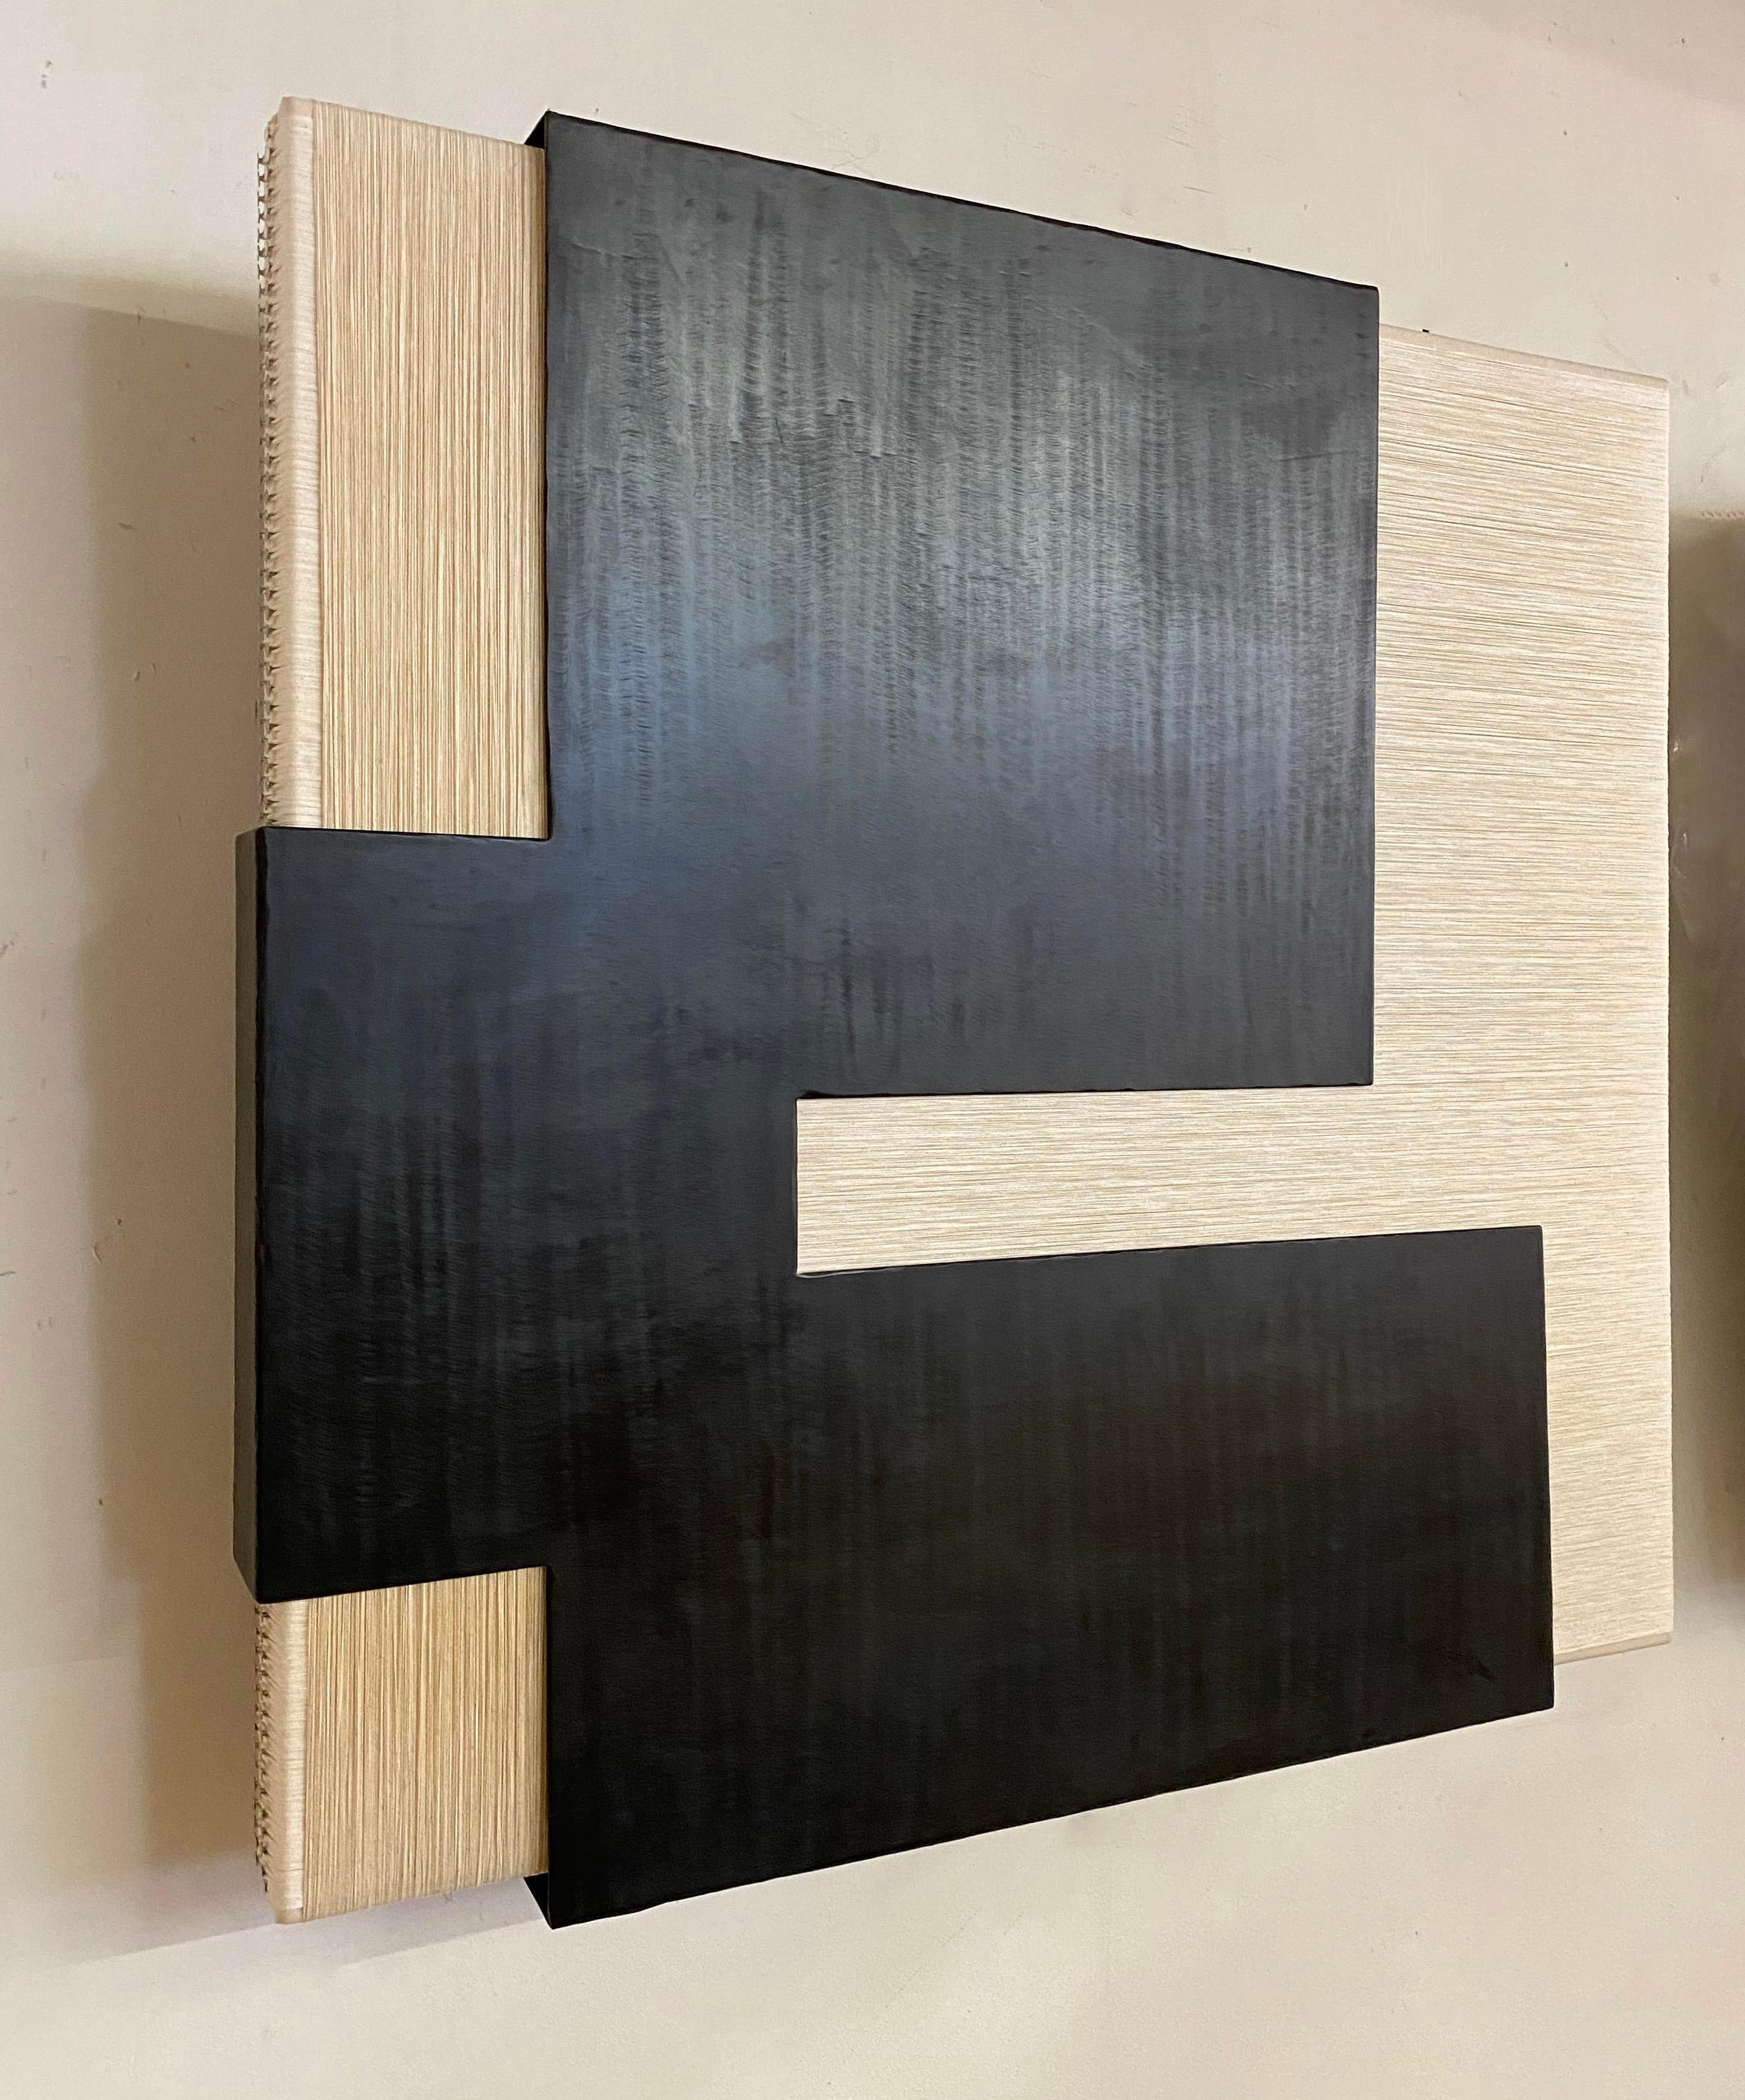 Wall sculpture no. 3
J.M. Szymanski x Marco Querin
d. 2021

This collaboration with Marco Querin is a study in conflict — hard metal vs soft textile, broken panels vs continuous threads, light and airy fiber vs dark and dense steel, subtle